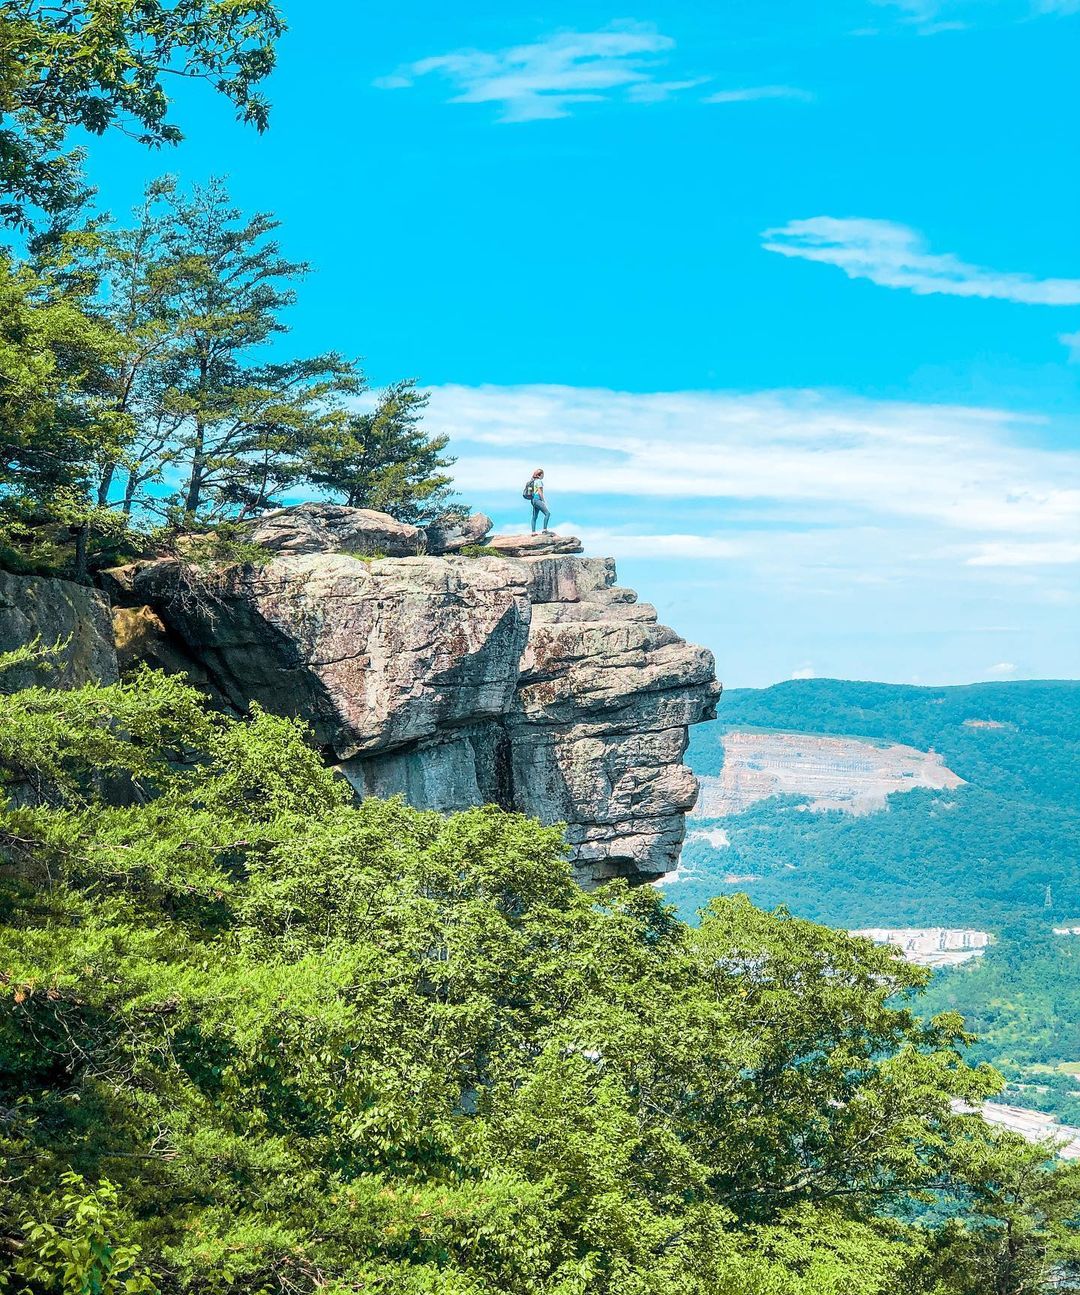 Person at Lookout Mountain Standing at the Edge of a Cliff. Photo by Instagram user @hope.maum